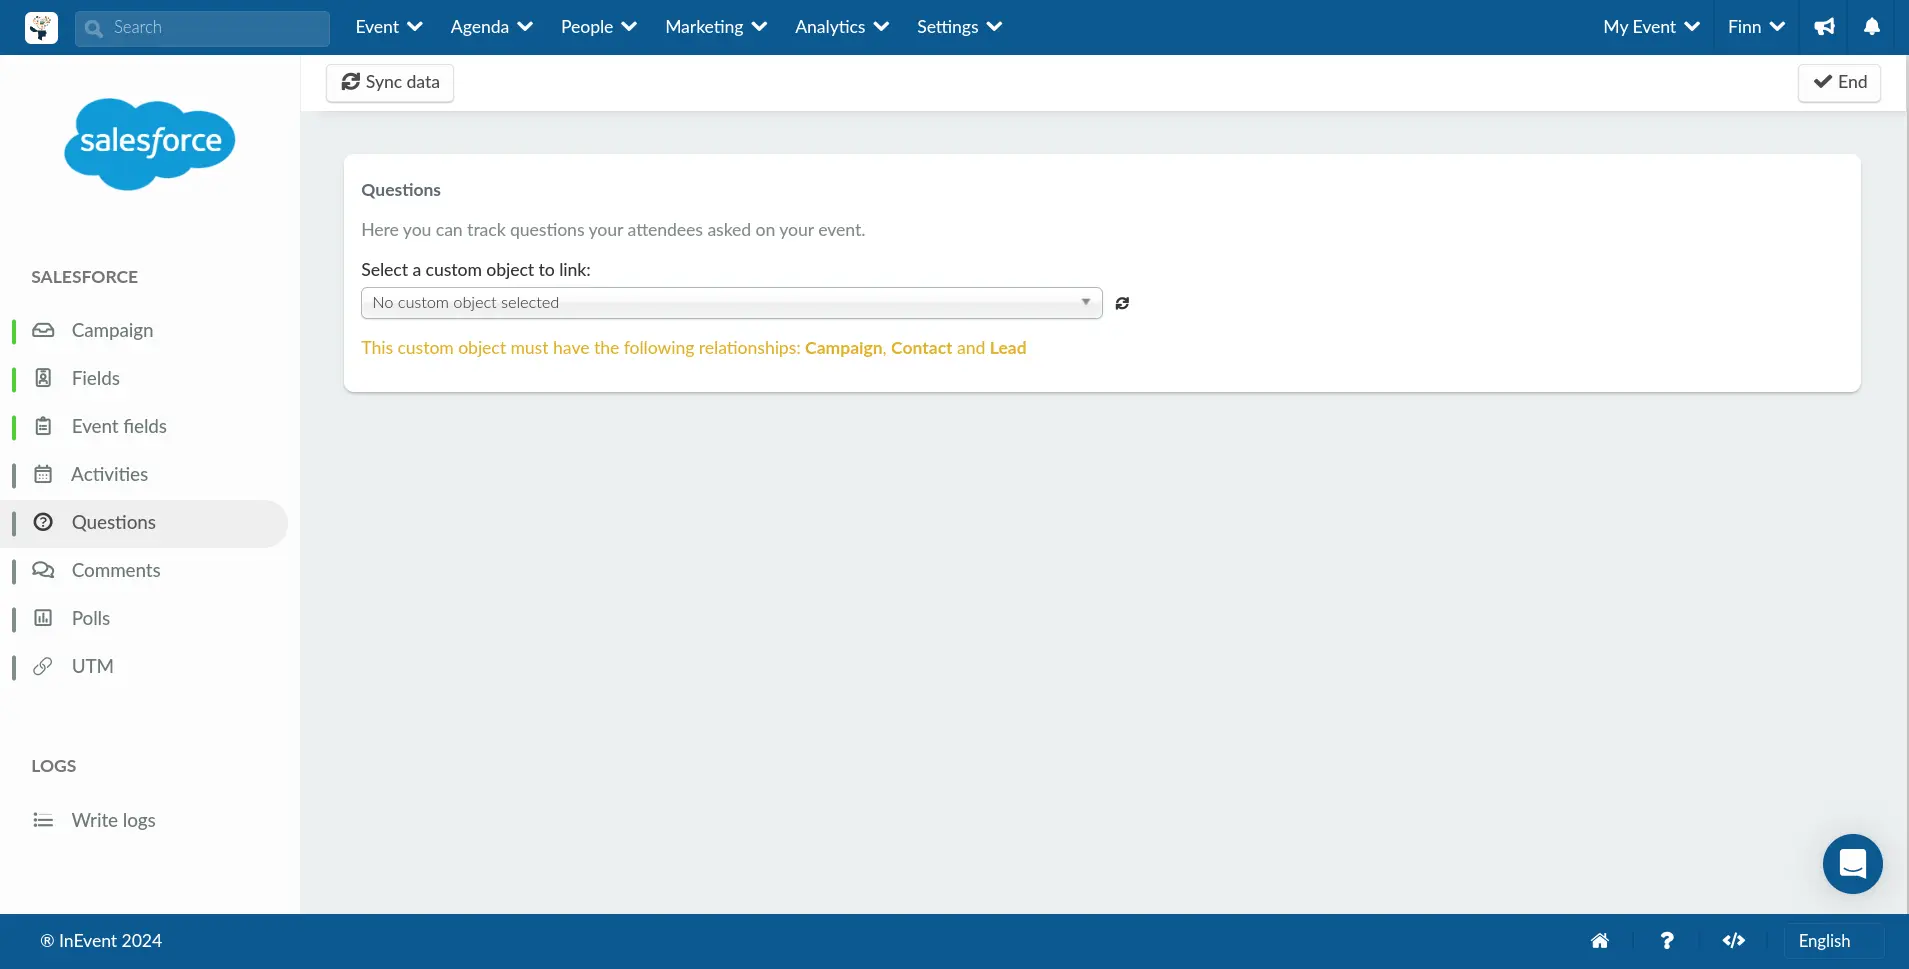 Screenshot showing the Activities, Questions, Comments, Polls, and UTM sections in the Salesforce integration interface.